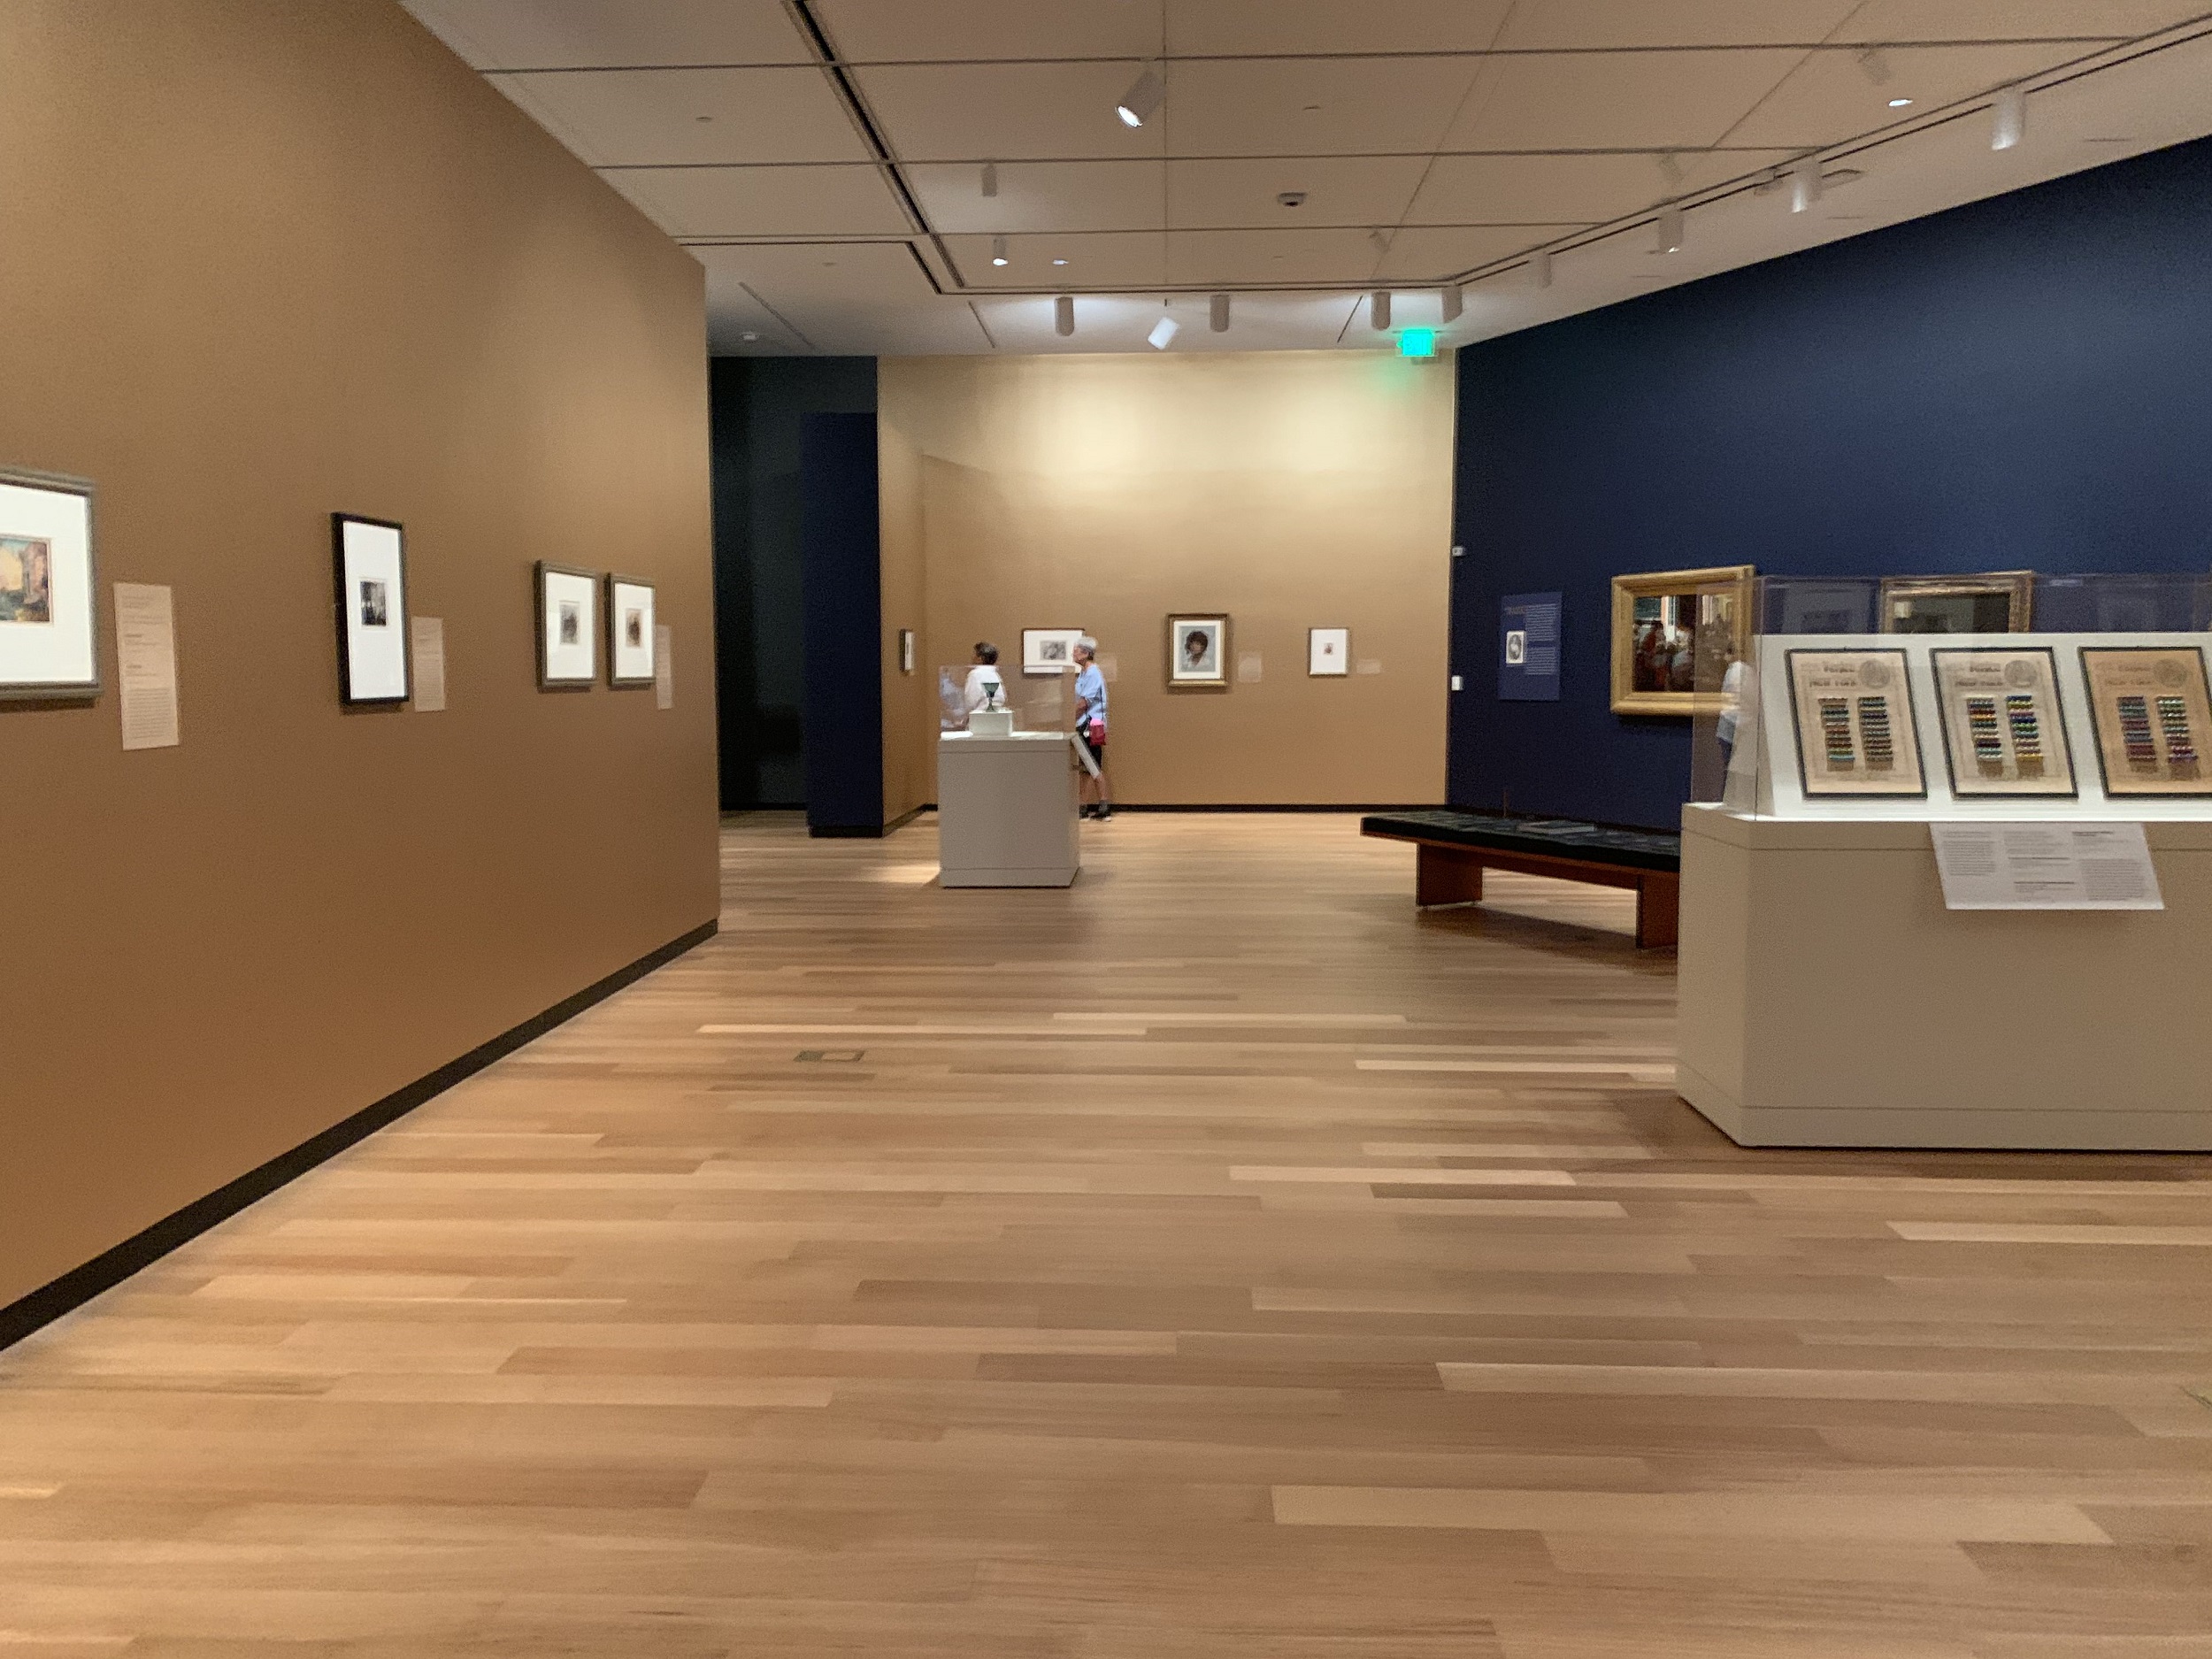 Interior of a museum gallery with works on paper hung on mustard-colored walls. There is a glass-topped case to the right.